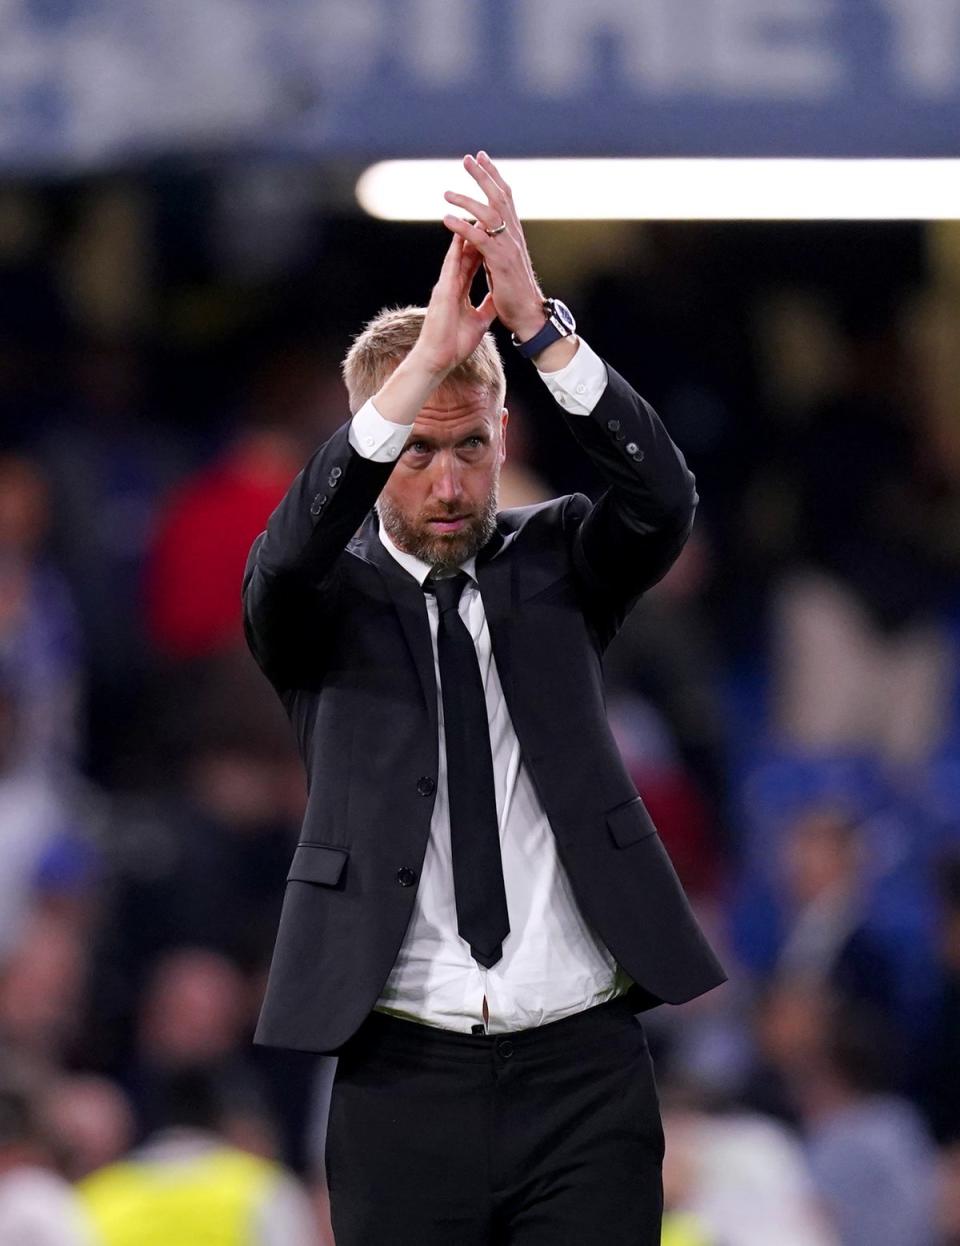 Graham Potter, pictured, endured a frustrating first match at the Chelsea helm with a 1-1 Champions League draw with RB Salzburg (John Walton/PA) (PA Wire)